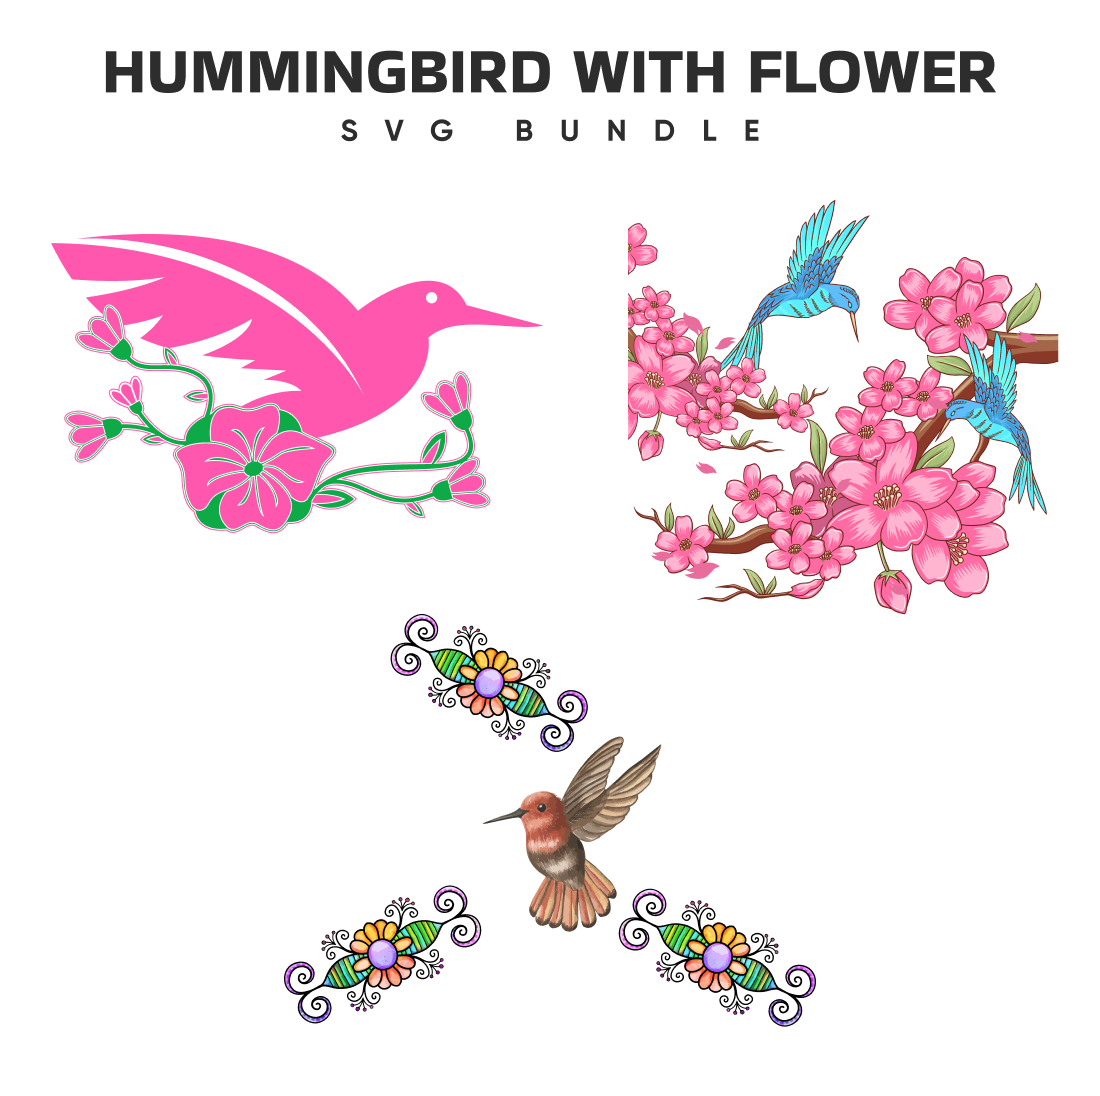 The hummingbird with the flower svg bundle.